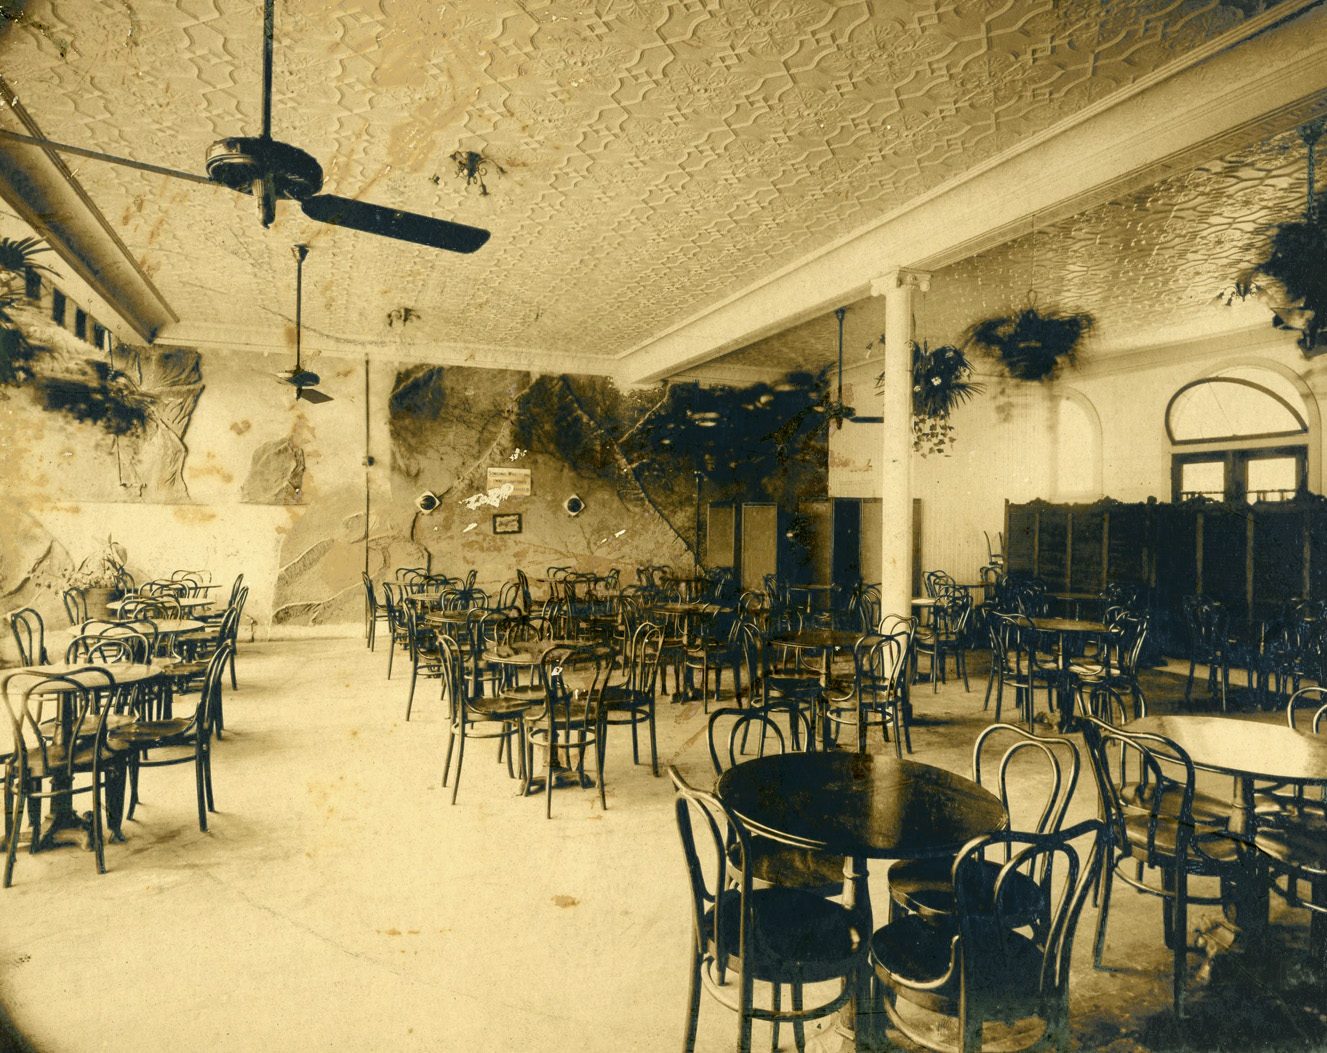 Interior view of Fred Geyer's beer garden after it was purchased from George Kozel. 1827 14th St. NW, Washington D.C. probably about 1904-1908. View full size.